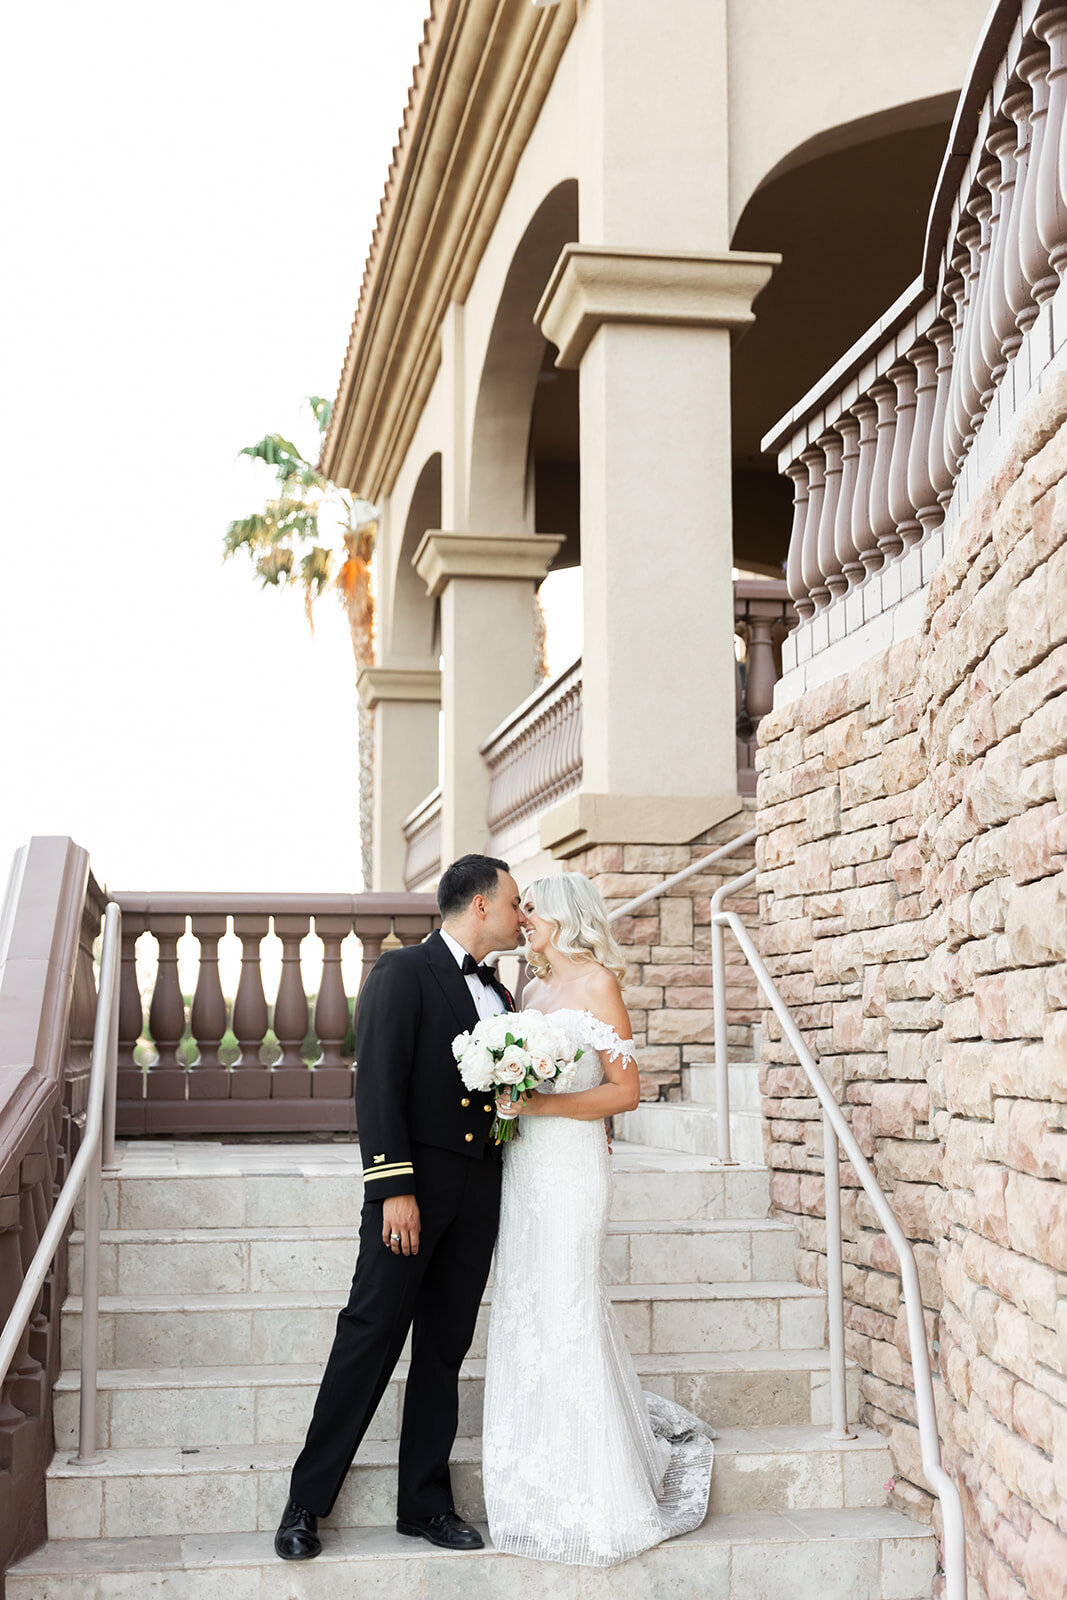 Karlie Colleen Photography - Holly & Ronnie Wedding - Seville Country Club - Gilbert Arizona-804